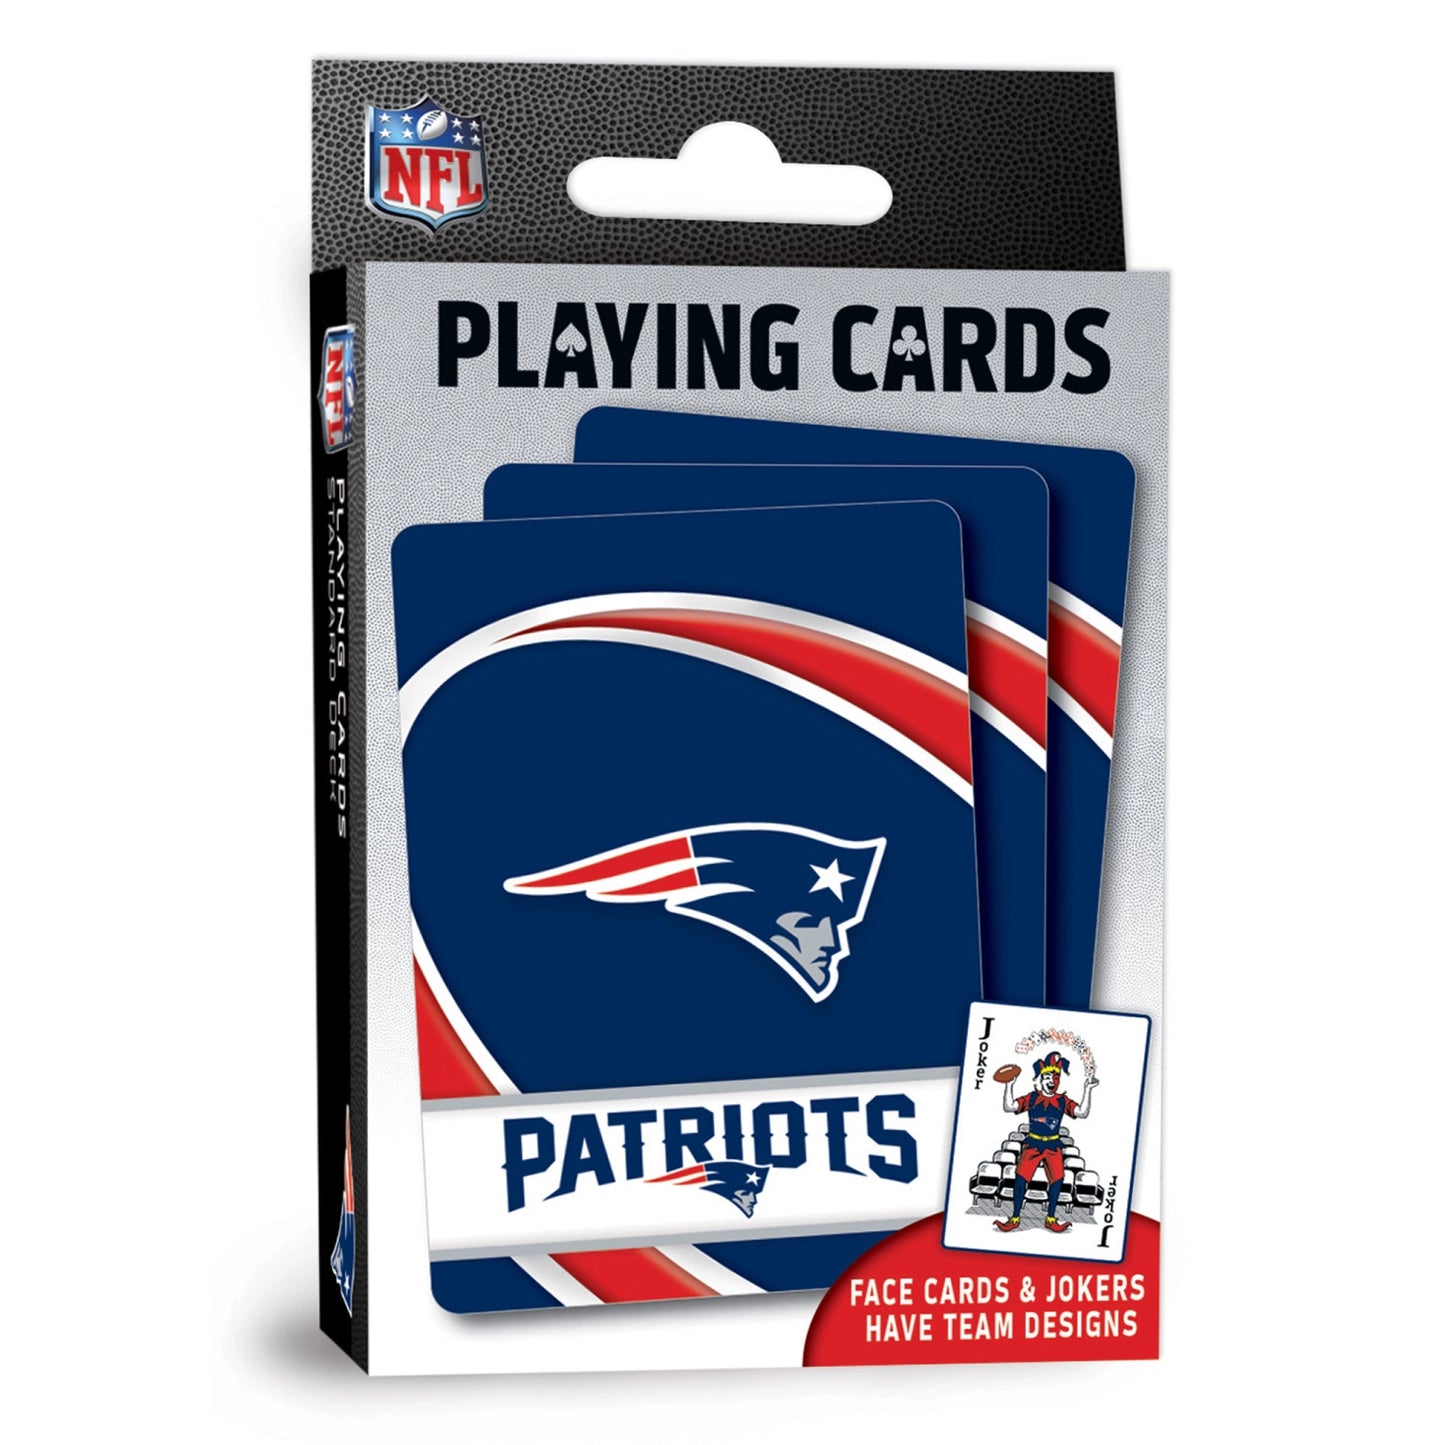 New England Patriots Playing Cards - Go Pats!